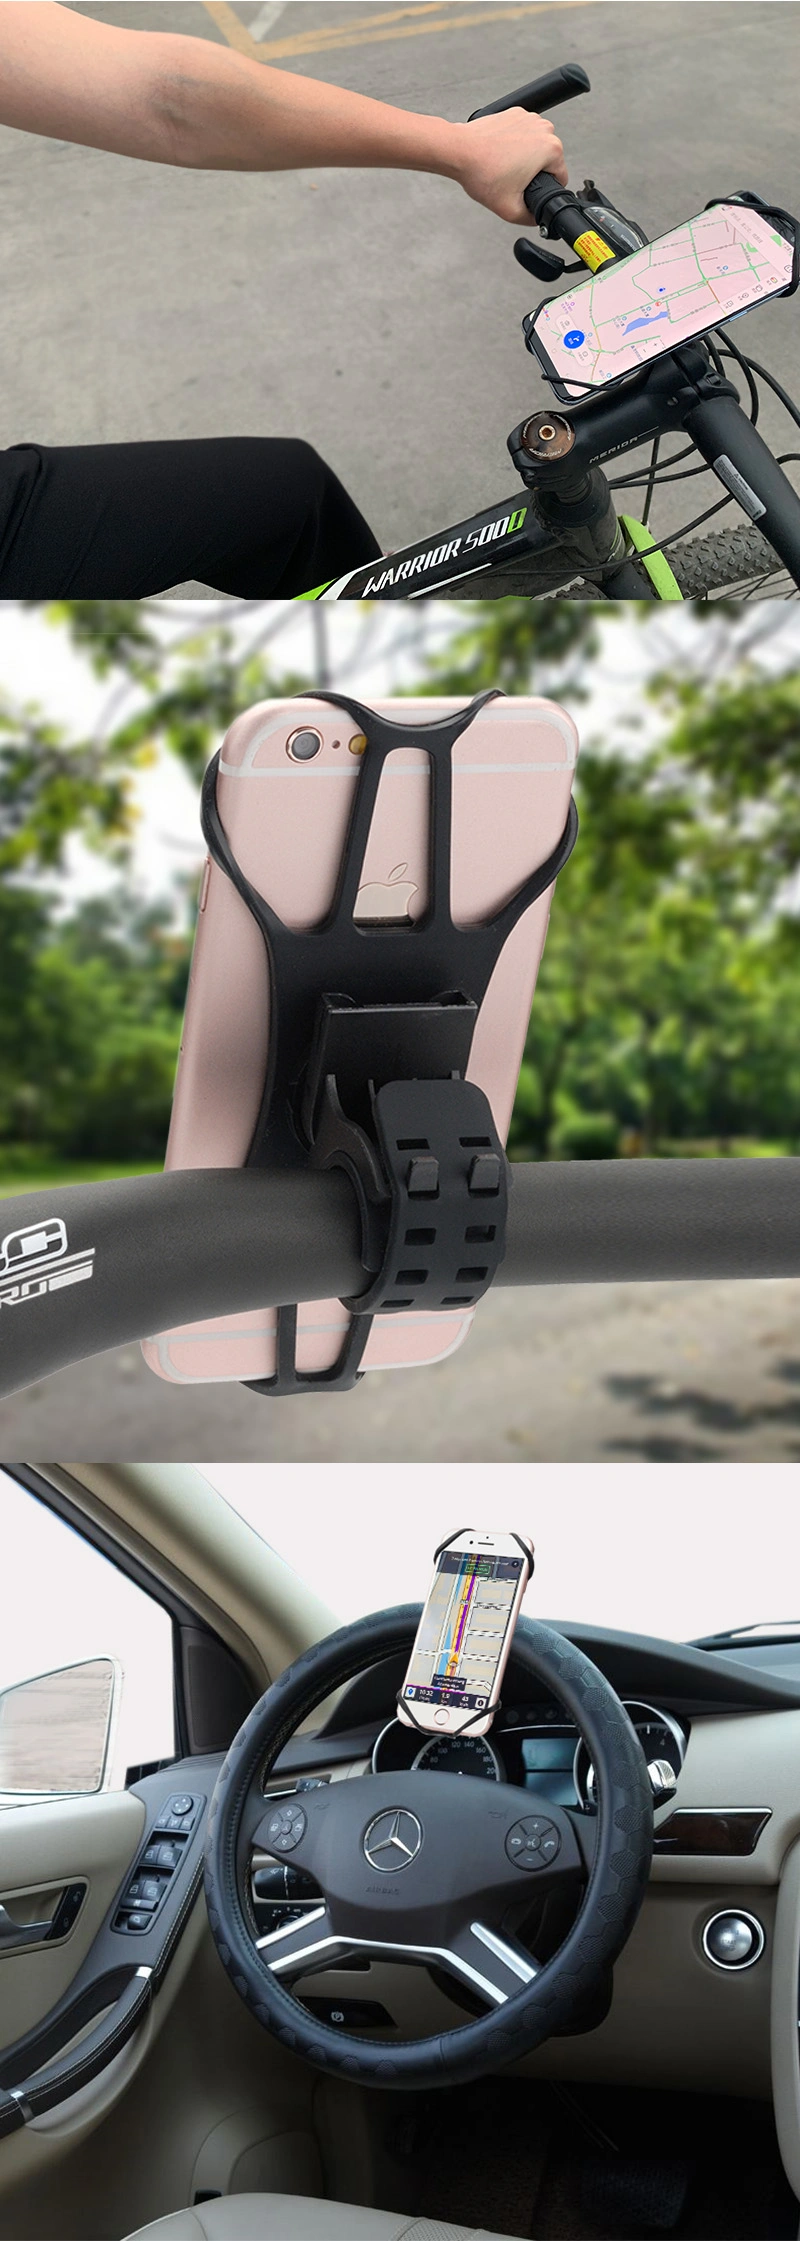 Bike Bicycle Motorcycle Phone Mount Holder for Cellphone Holder